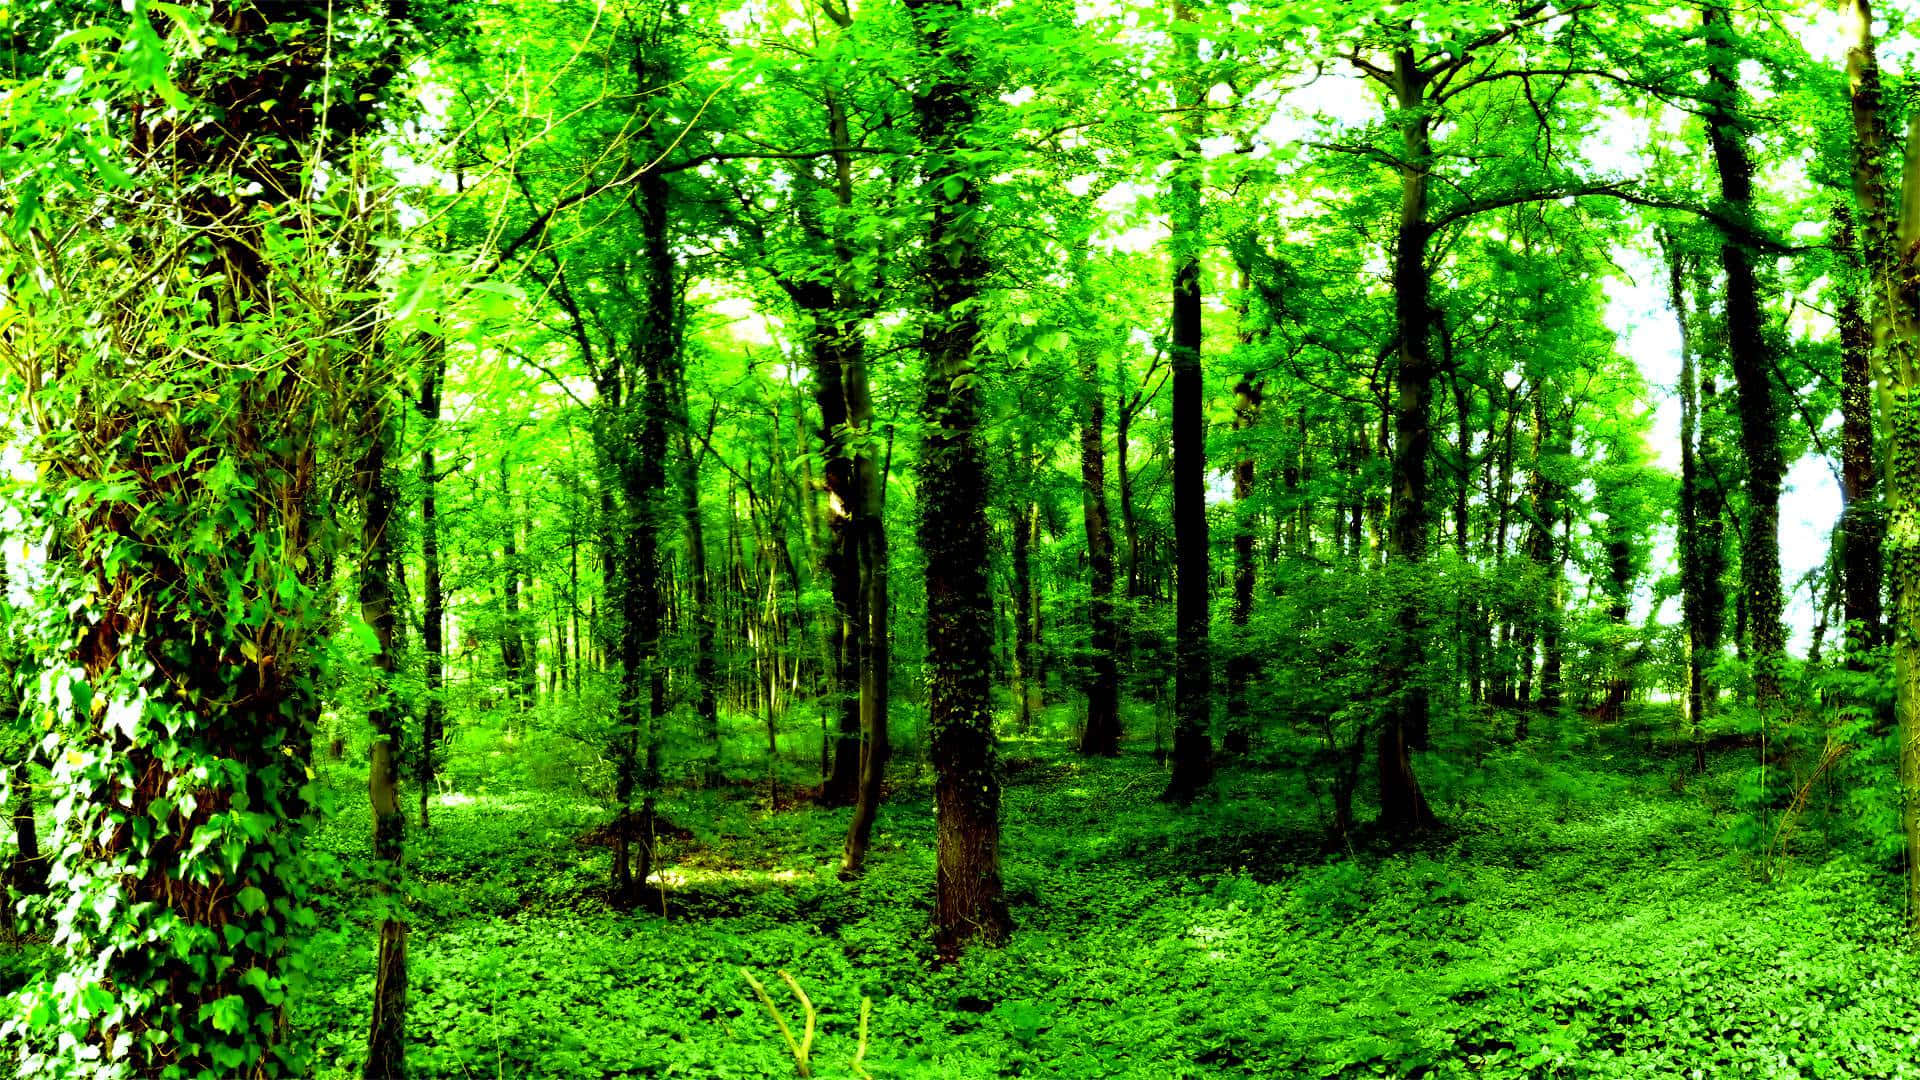 Nature At Its Finest: A peaceful and vibrant forest green landscape Wallpaper